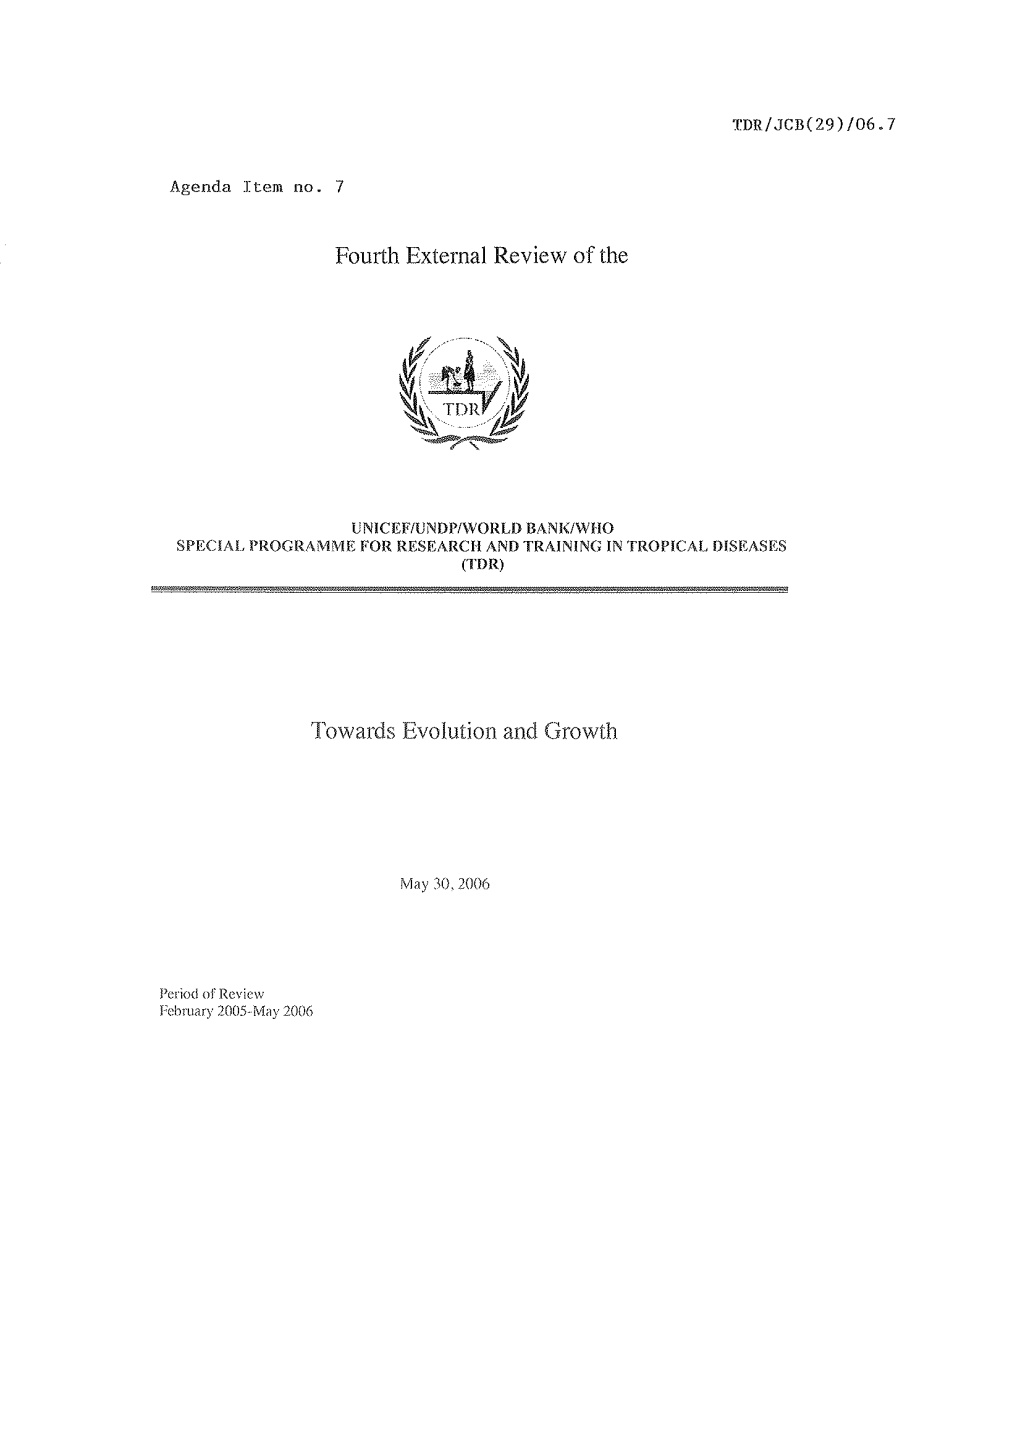 Fourth External Review Of